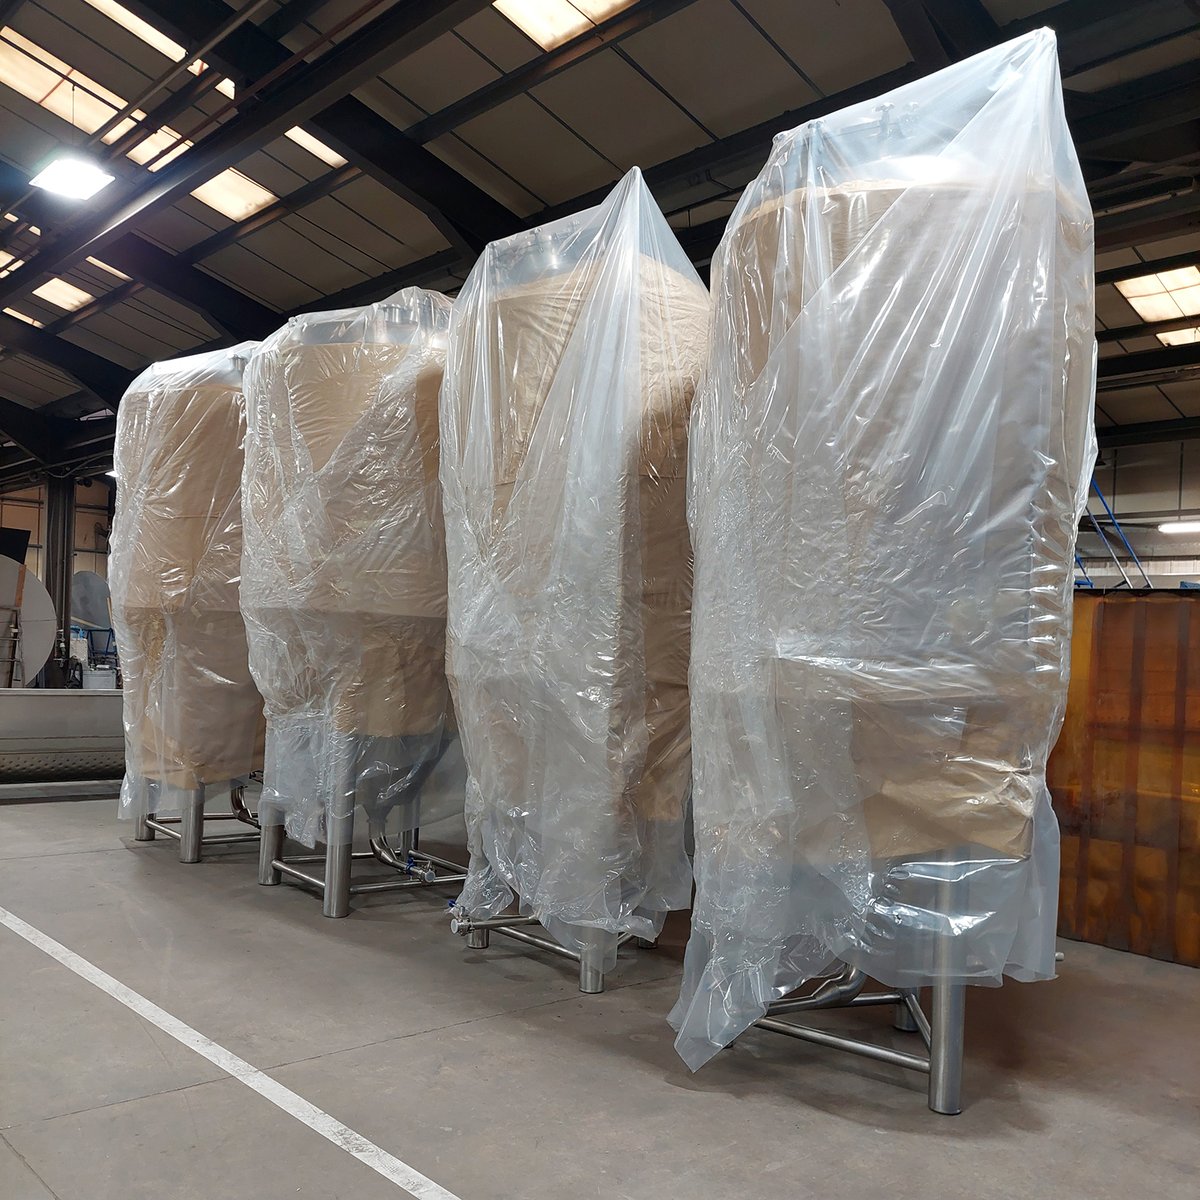 Brewery fermentation vessels are being wrapped up!

We specialise in hygienic vessels, pressure vessels, and thermal transfer technology and are ISO 9001 certified.

#DPV #fermentation #craftnotcrap  #vessels #britanx #fabdec #stainlesssteel #ukmanufacturing #ukmfg #ukmade